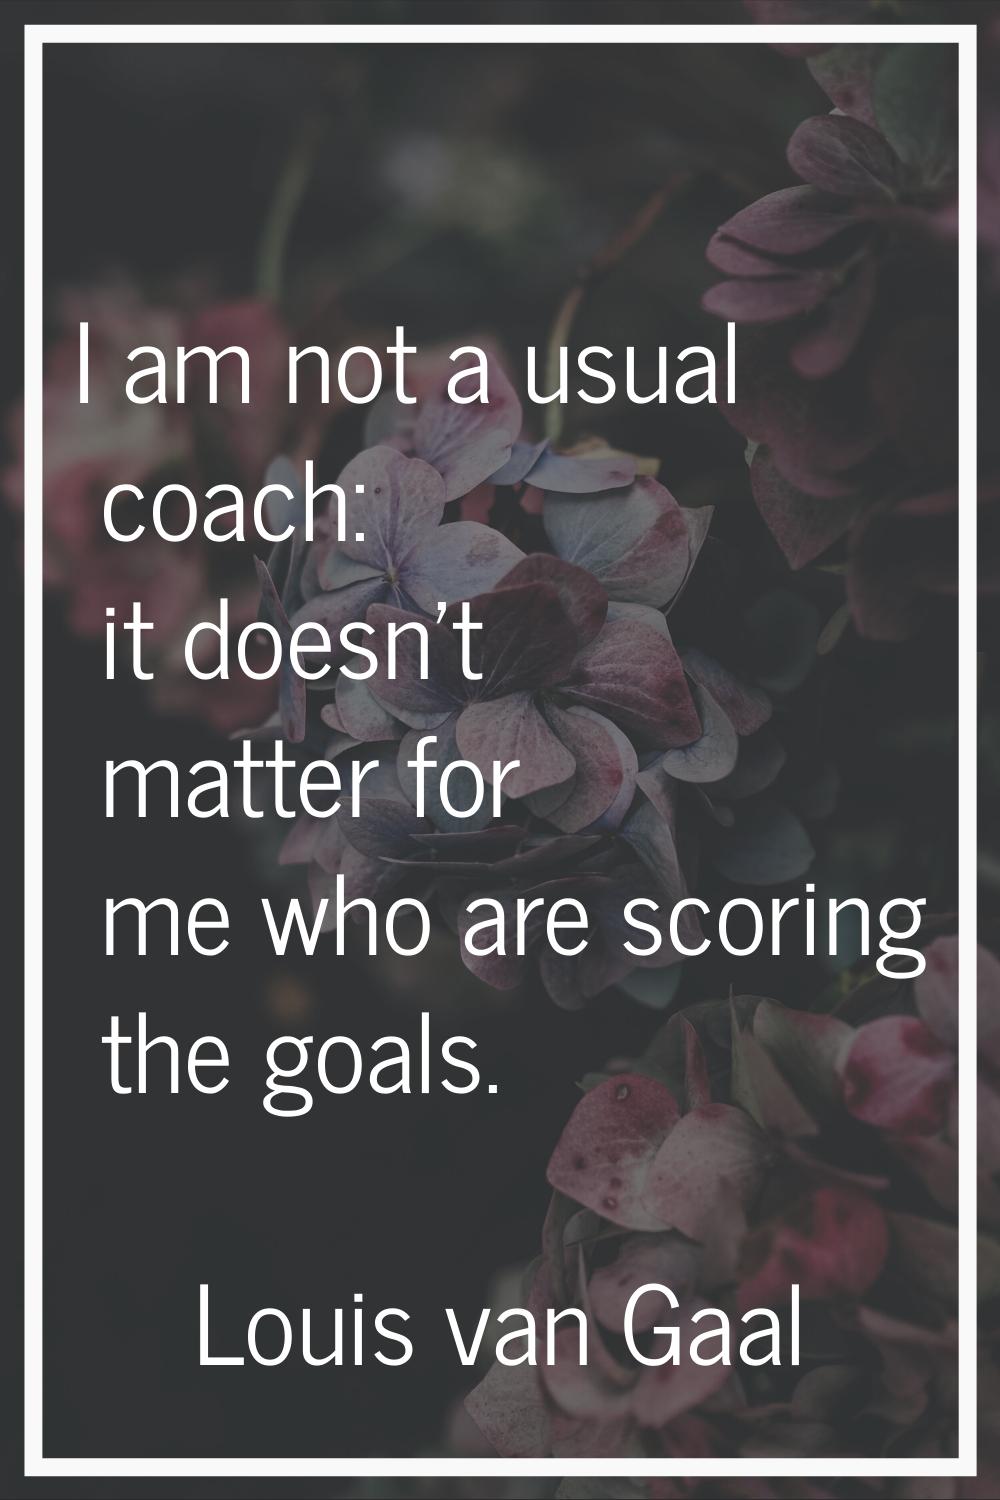 I am not a usual coach: it doesn't matter for me who are scoring the goals.